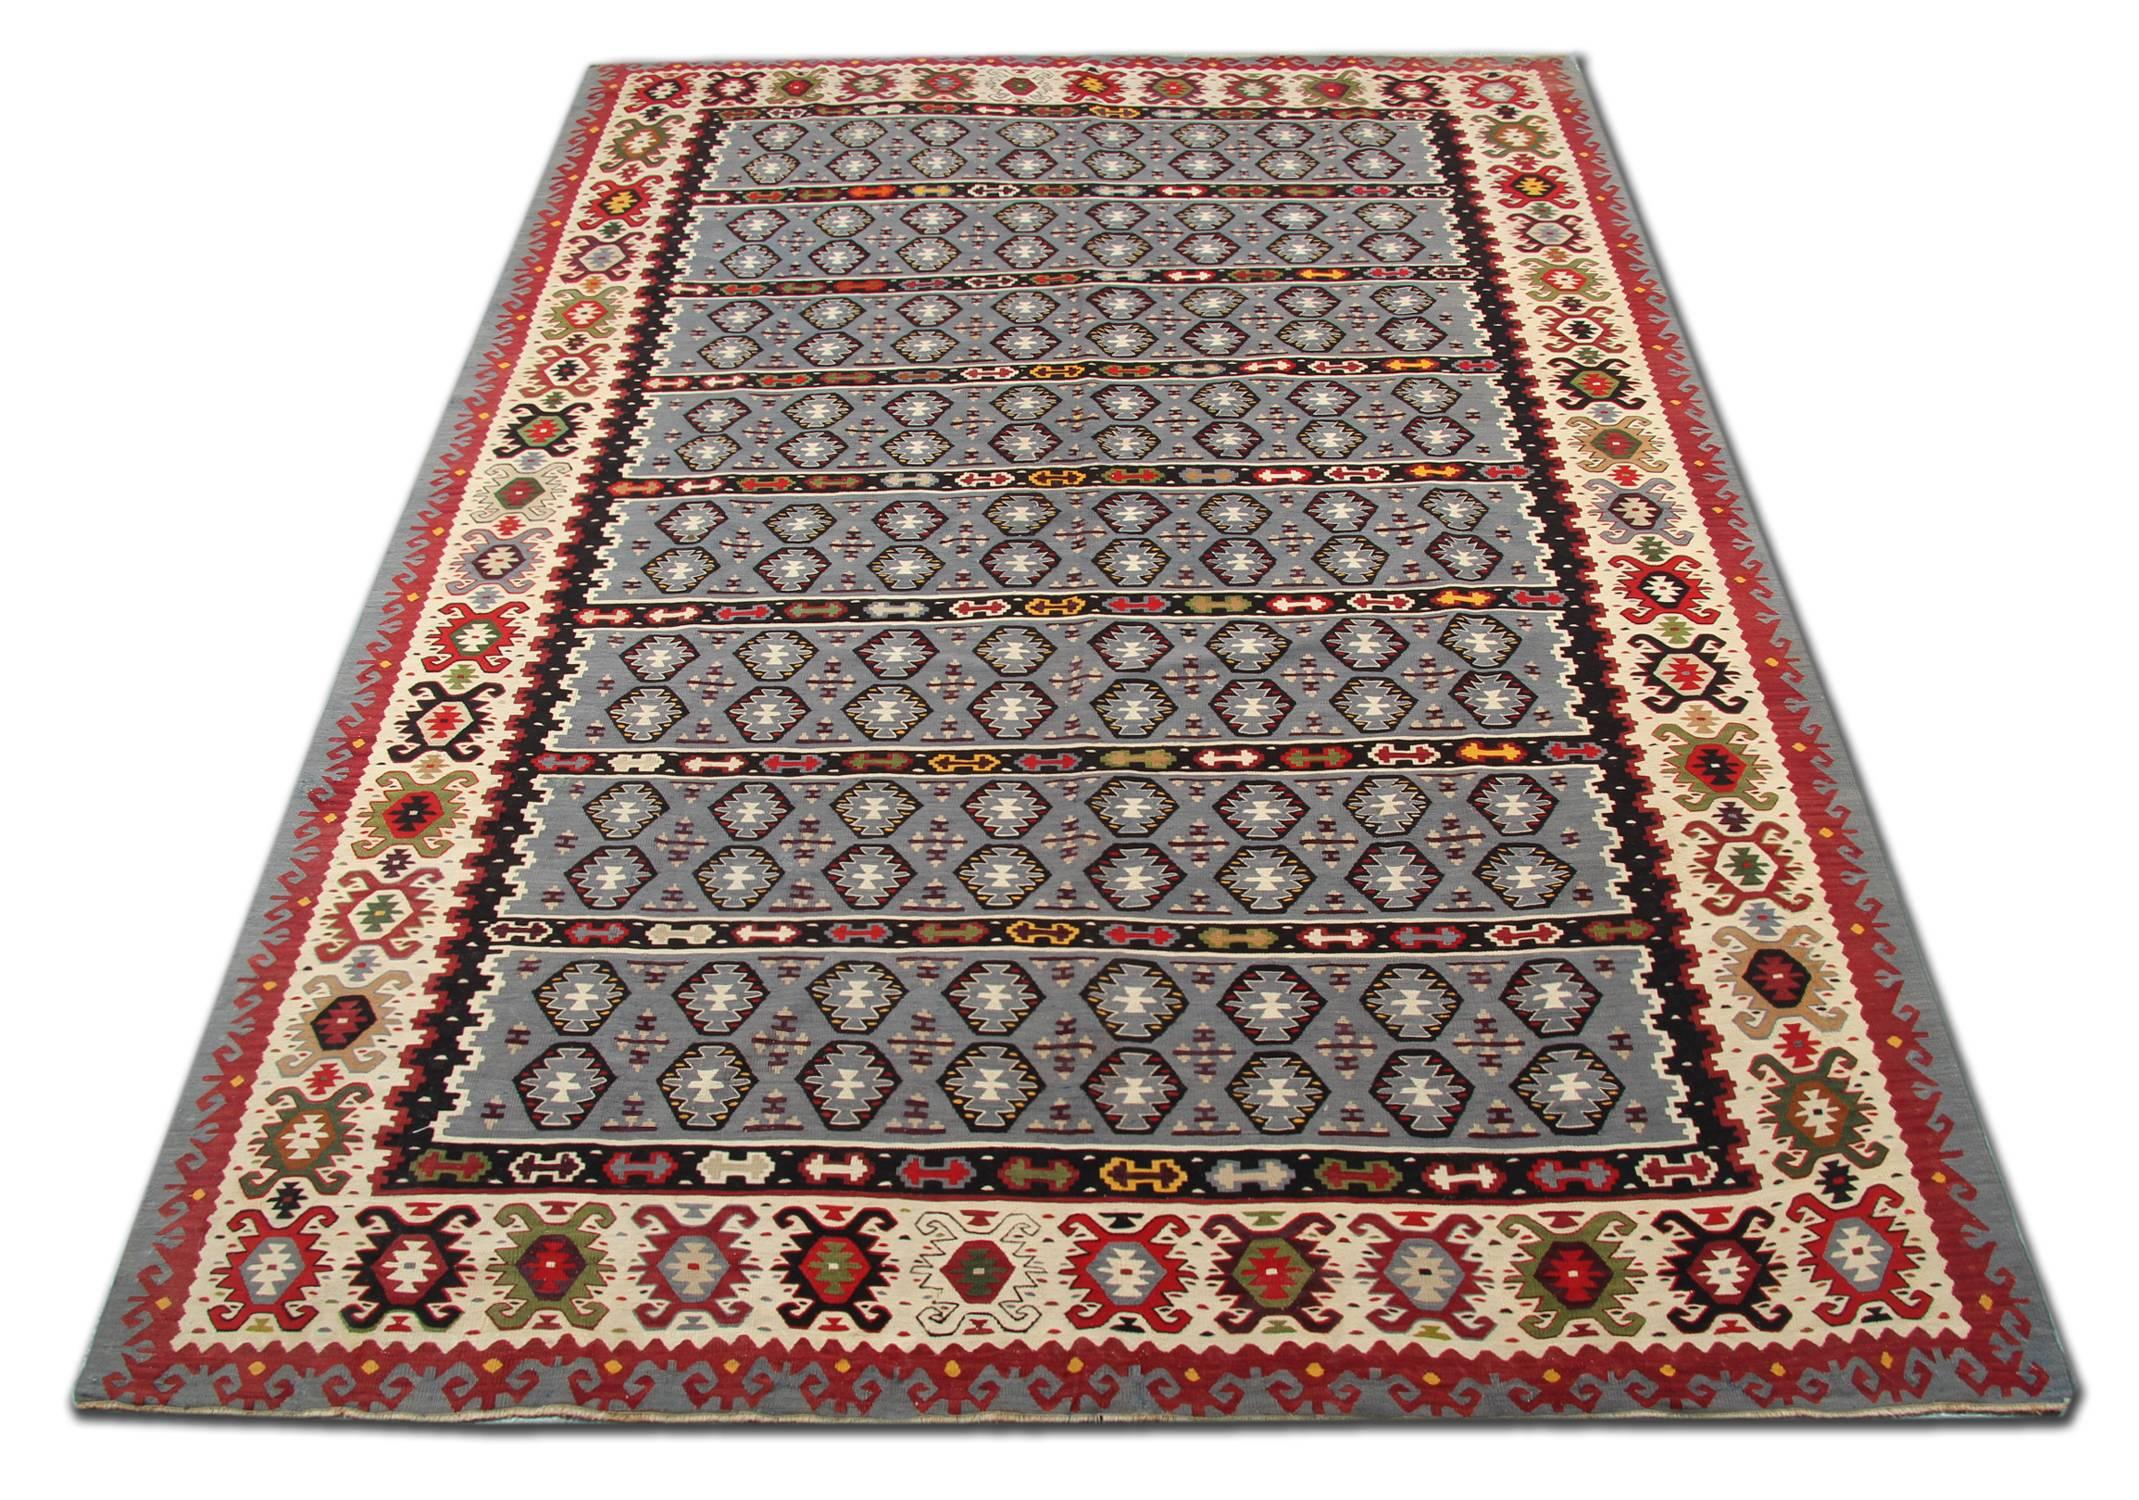 Pirot Kilim rug is traditionally produced in Pirot, a town in southeastern of Serbia. This Pirot Kelim is an excellent example of Eastern European handwoven and flat-weave tapestry rugs, traditionally produced in Pirot, a town in southeastern